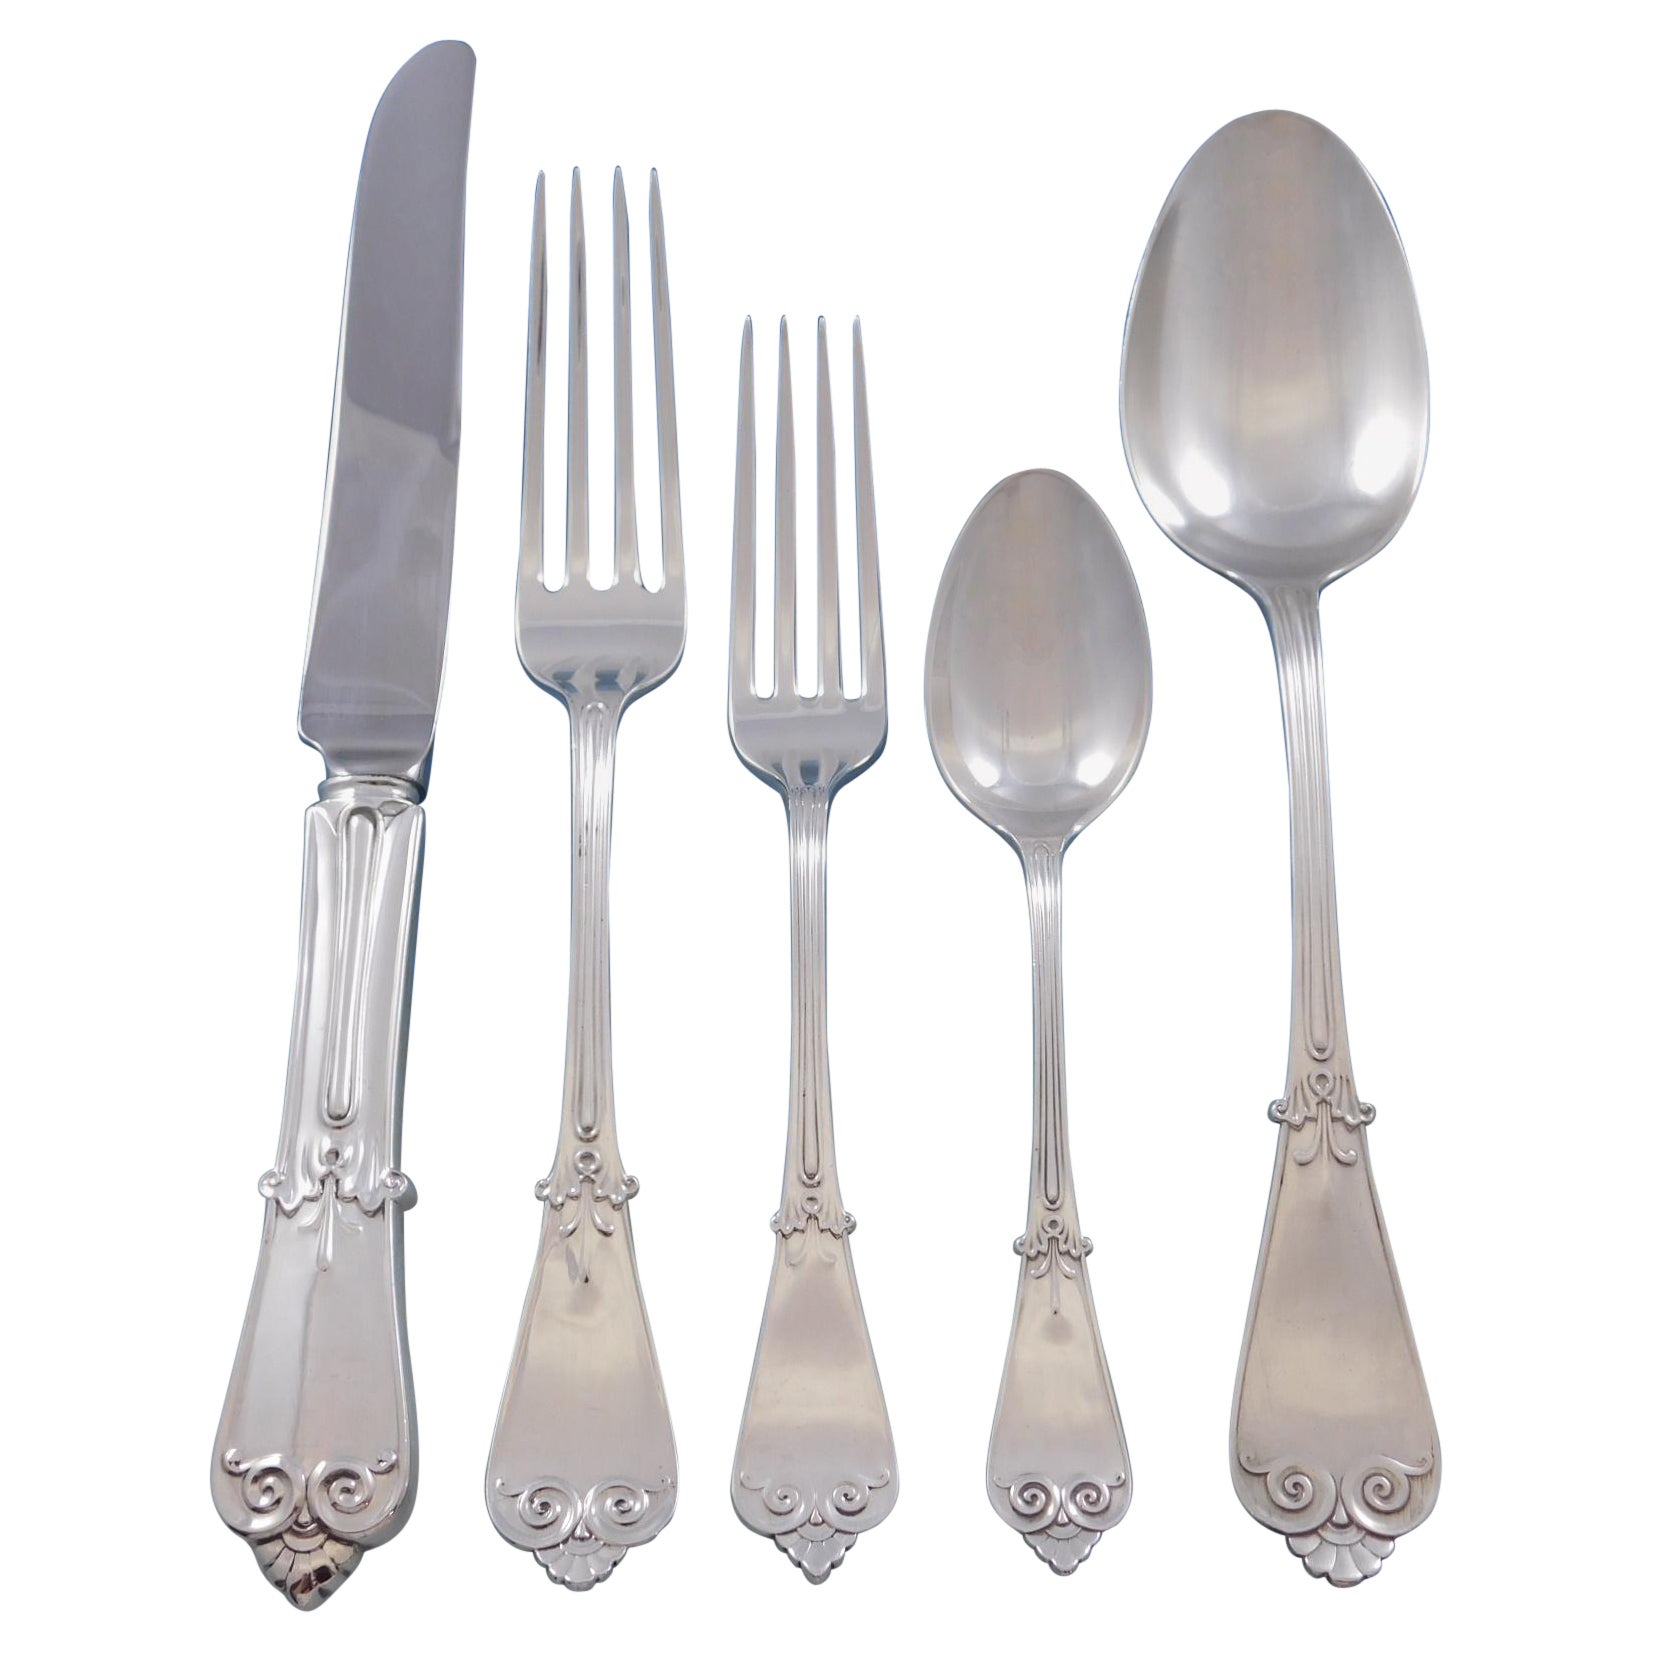 Beekman by Tiffany Co Sterling Silver Flatware Set for 12 Service 61 Pcs Dinner